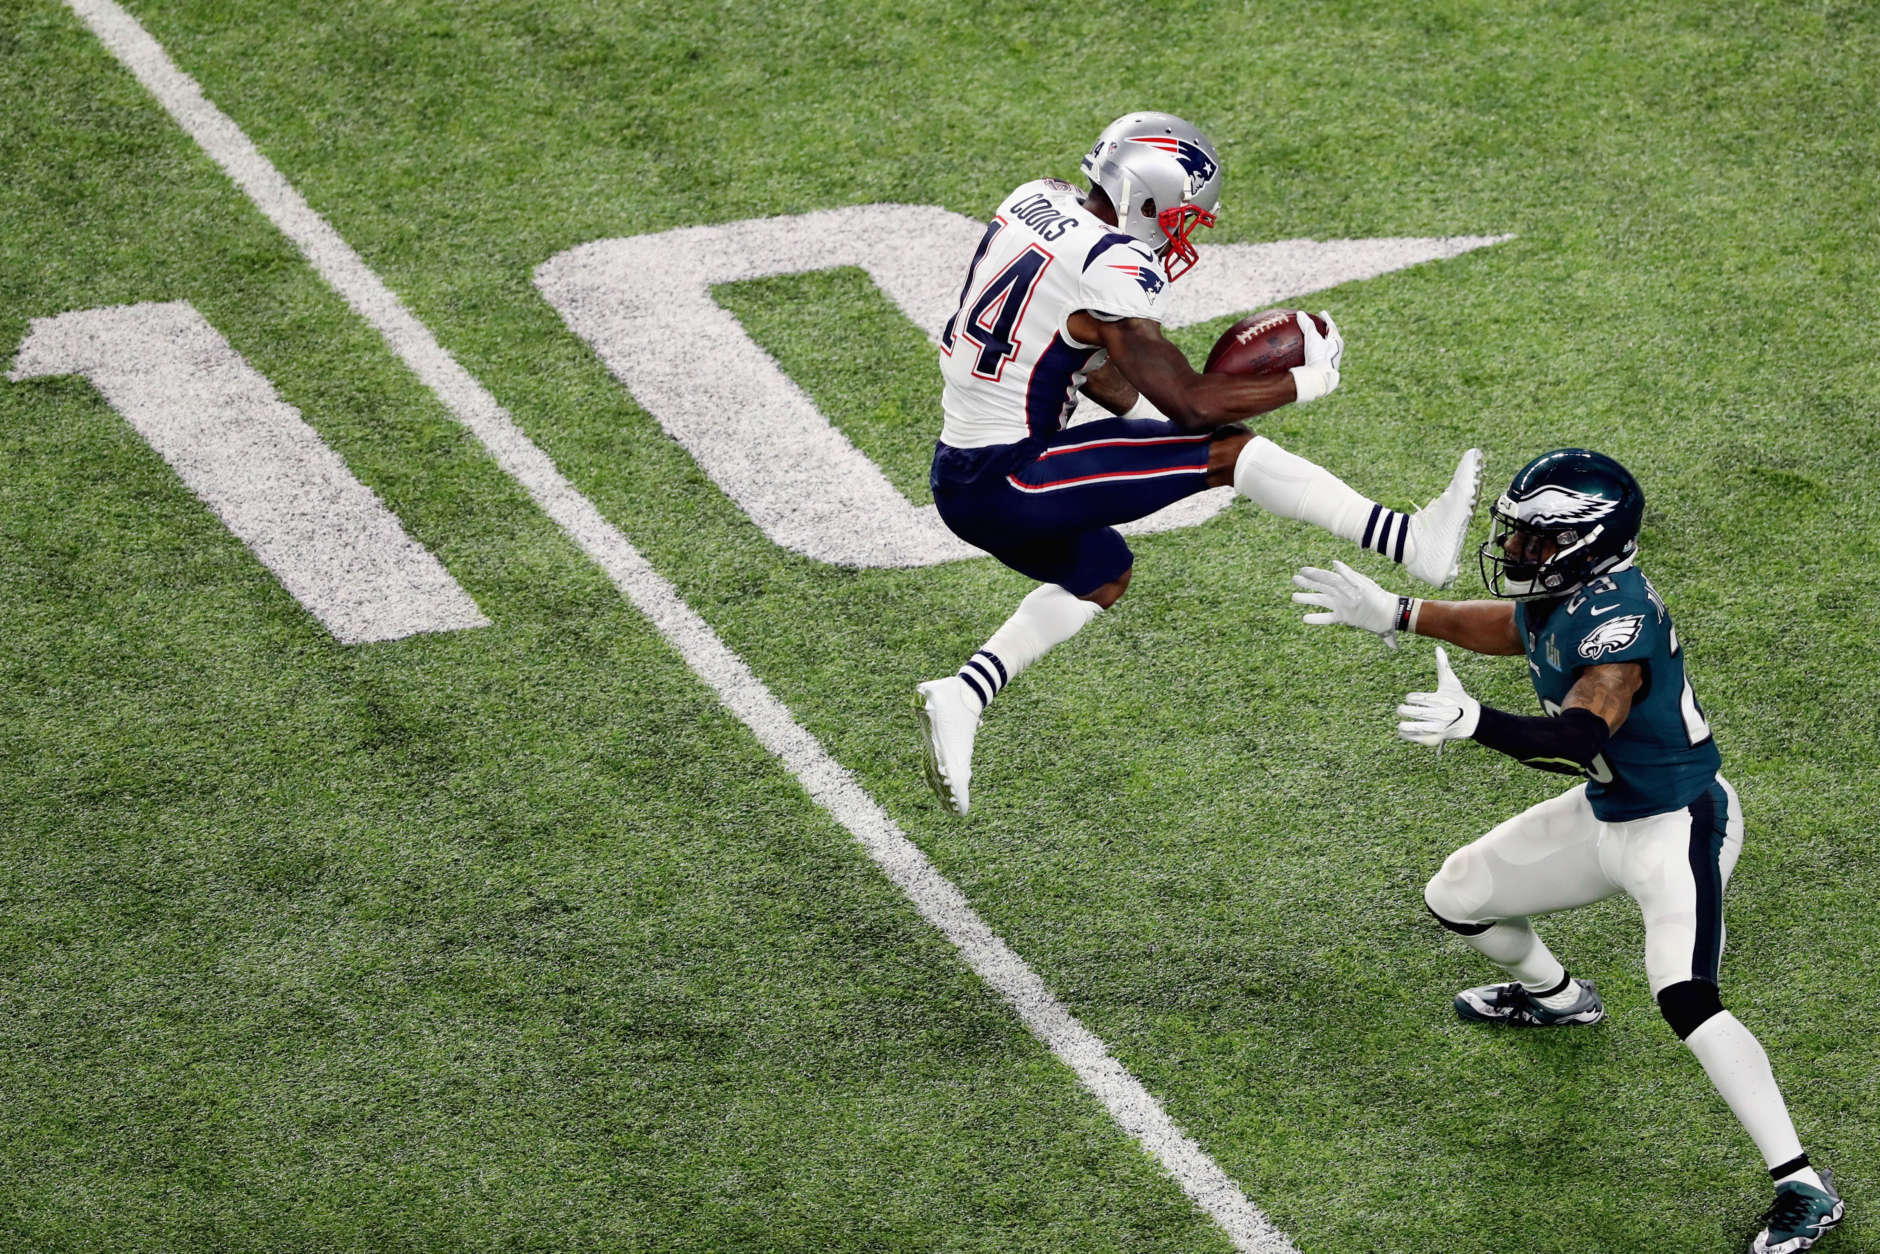 MINNEAPOLIS, MN - FEBRUARY 04:  Brandin Cooks #14 of the New England Patriots is stopped by Rodney McLeod #23 of the Philadelphia Eagles as he attempts to leap over the tackle try during the second quarter of Super Bowl LII at U.S. Bank Stadium on February 4, 2018 in Minneapolis, Minnesota.  (Photo by Christian Petersen/Getty Images)